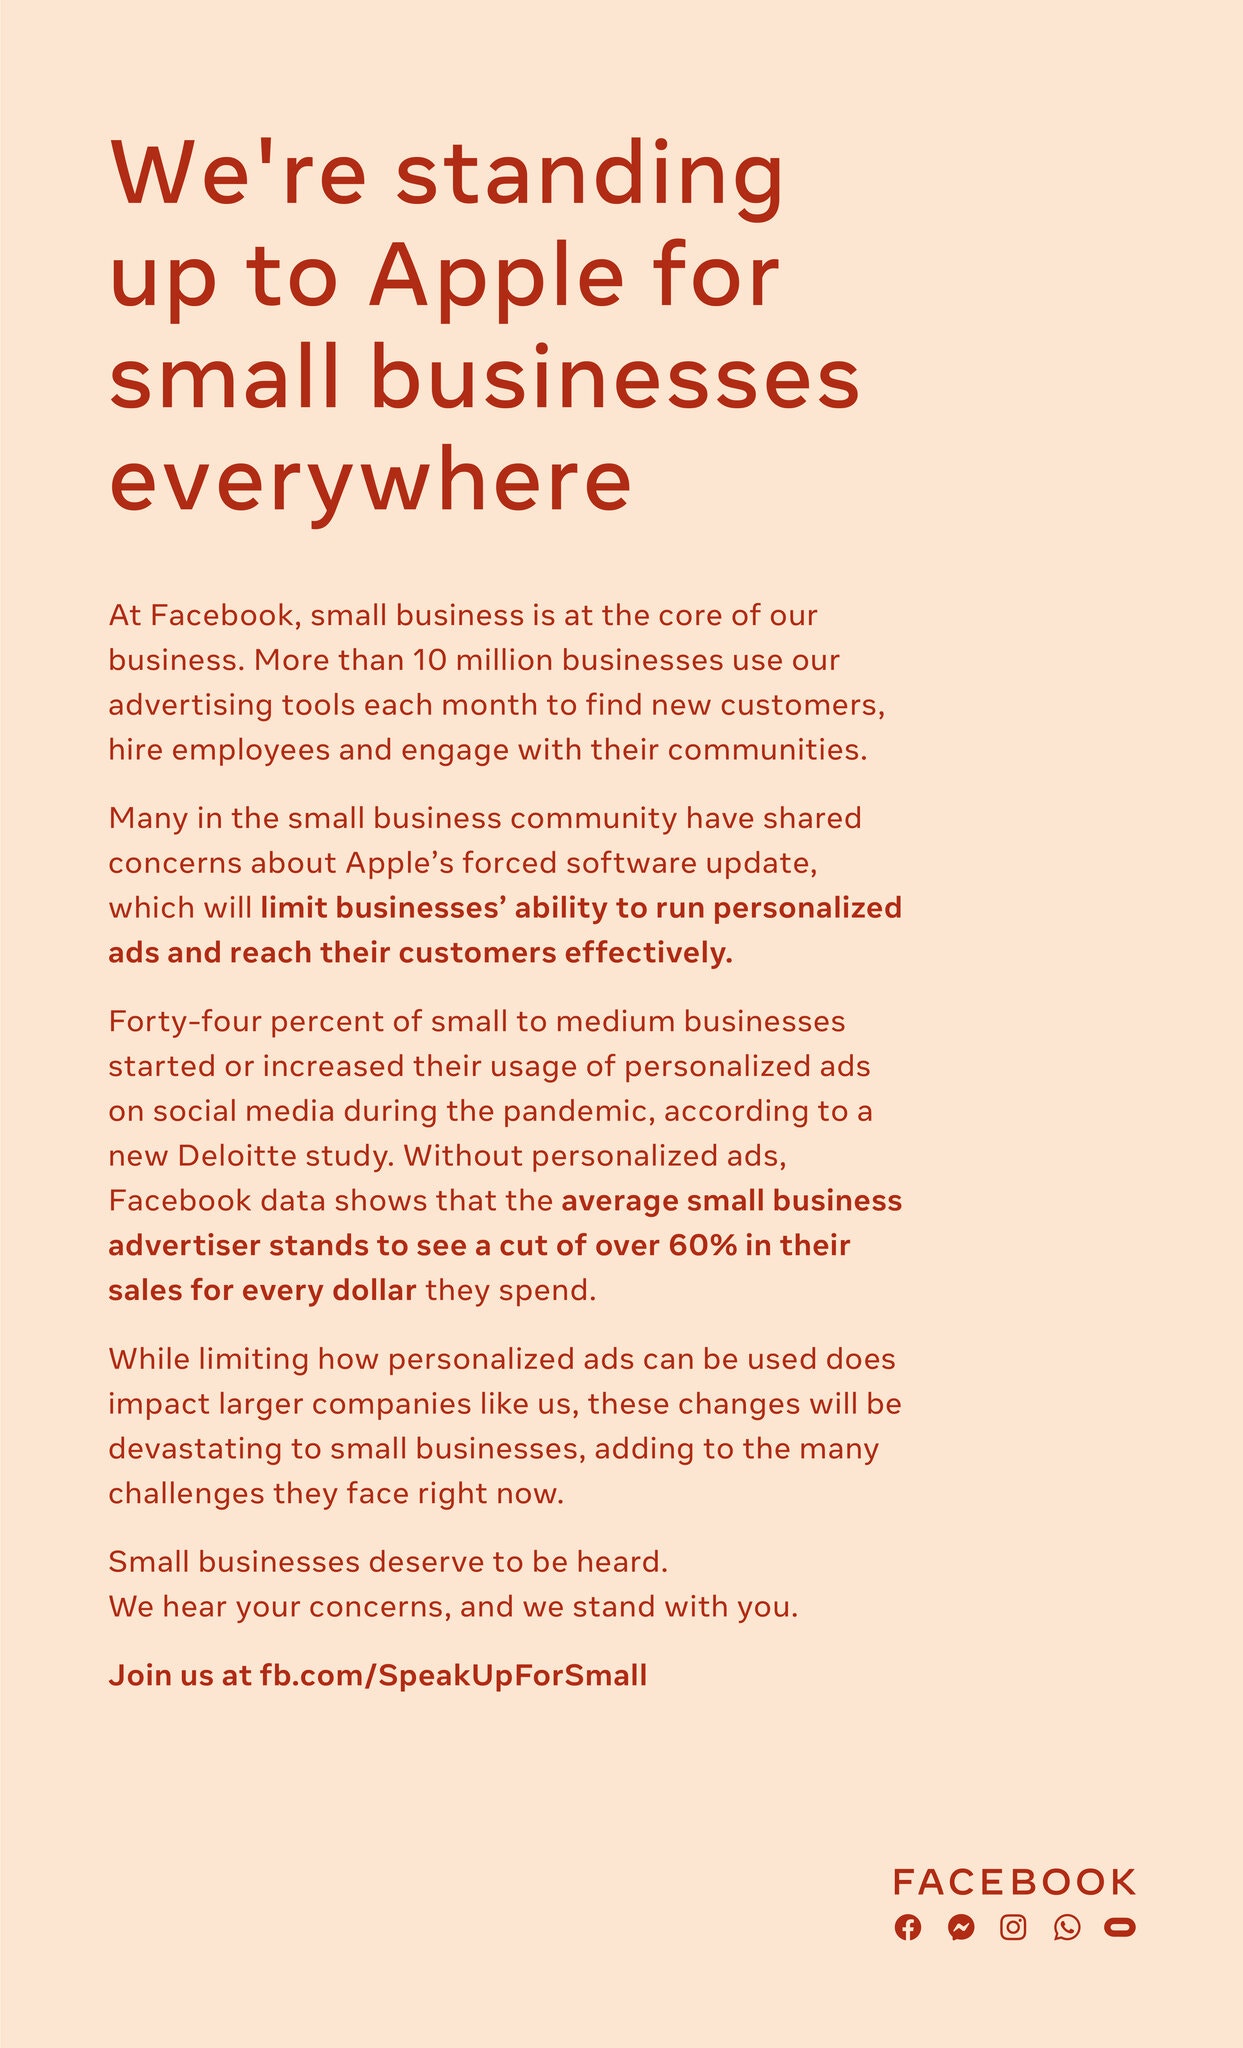 Facebook Vs Apple Full Page Callout Ad in New York Times